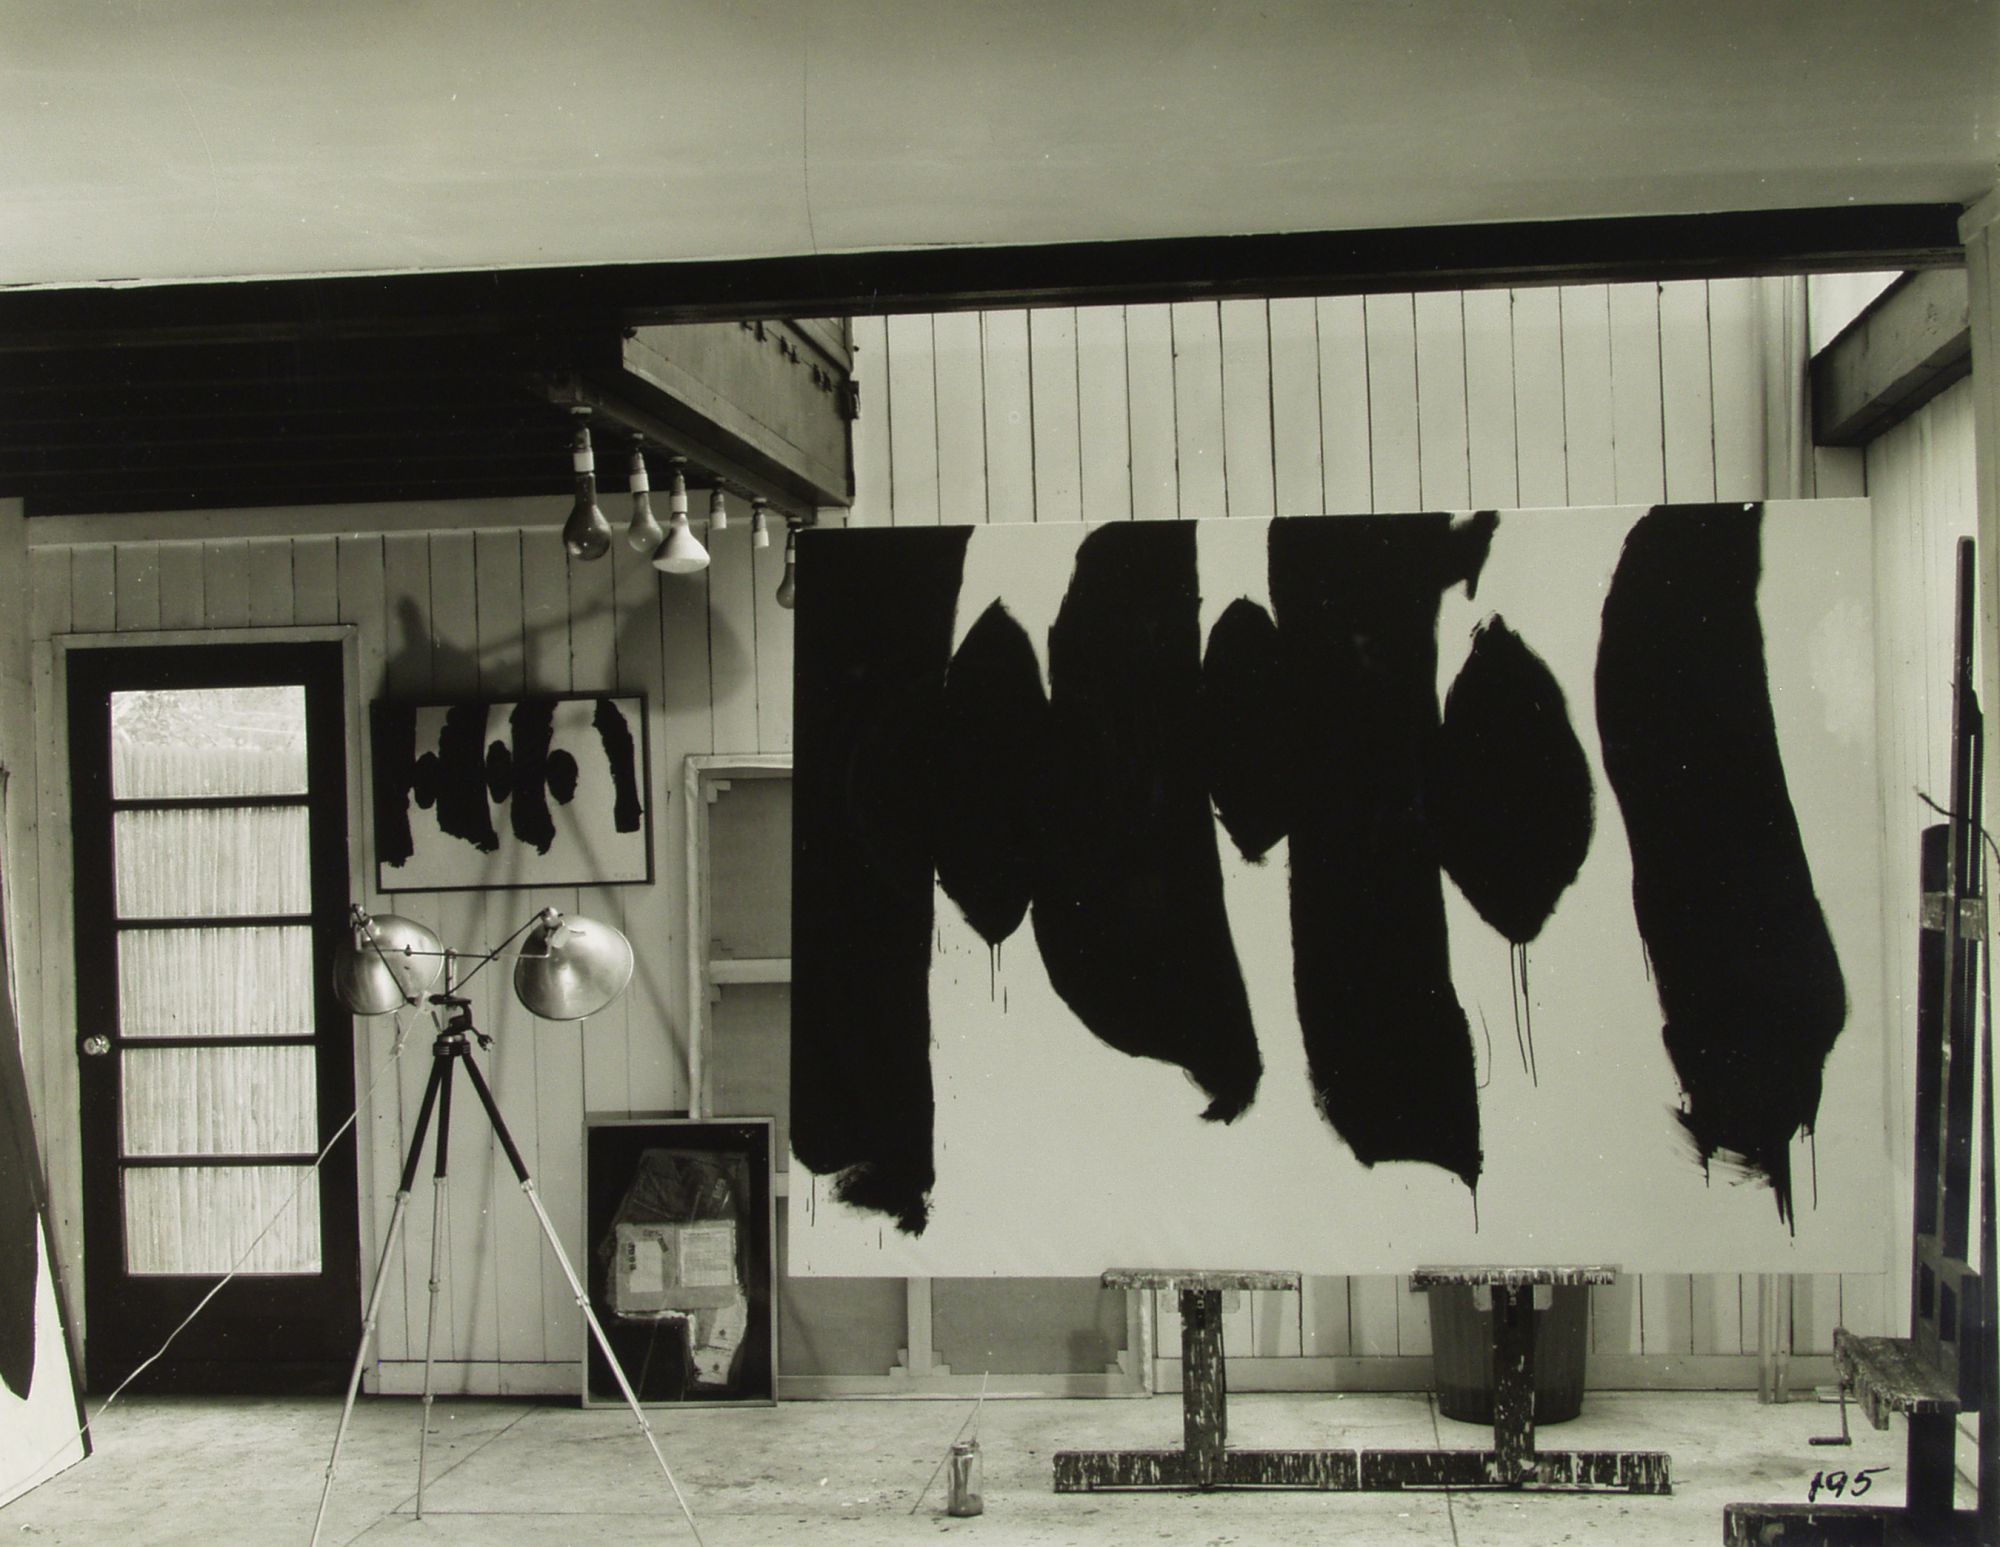 Motherwell’s studio at 173 E. 94th Street, New York. From left to right: Spanish Elegy XIV (Palamos) and an early state of Diary of a Painter, 1958